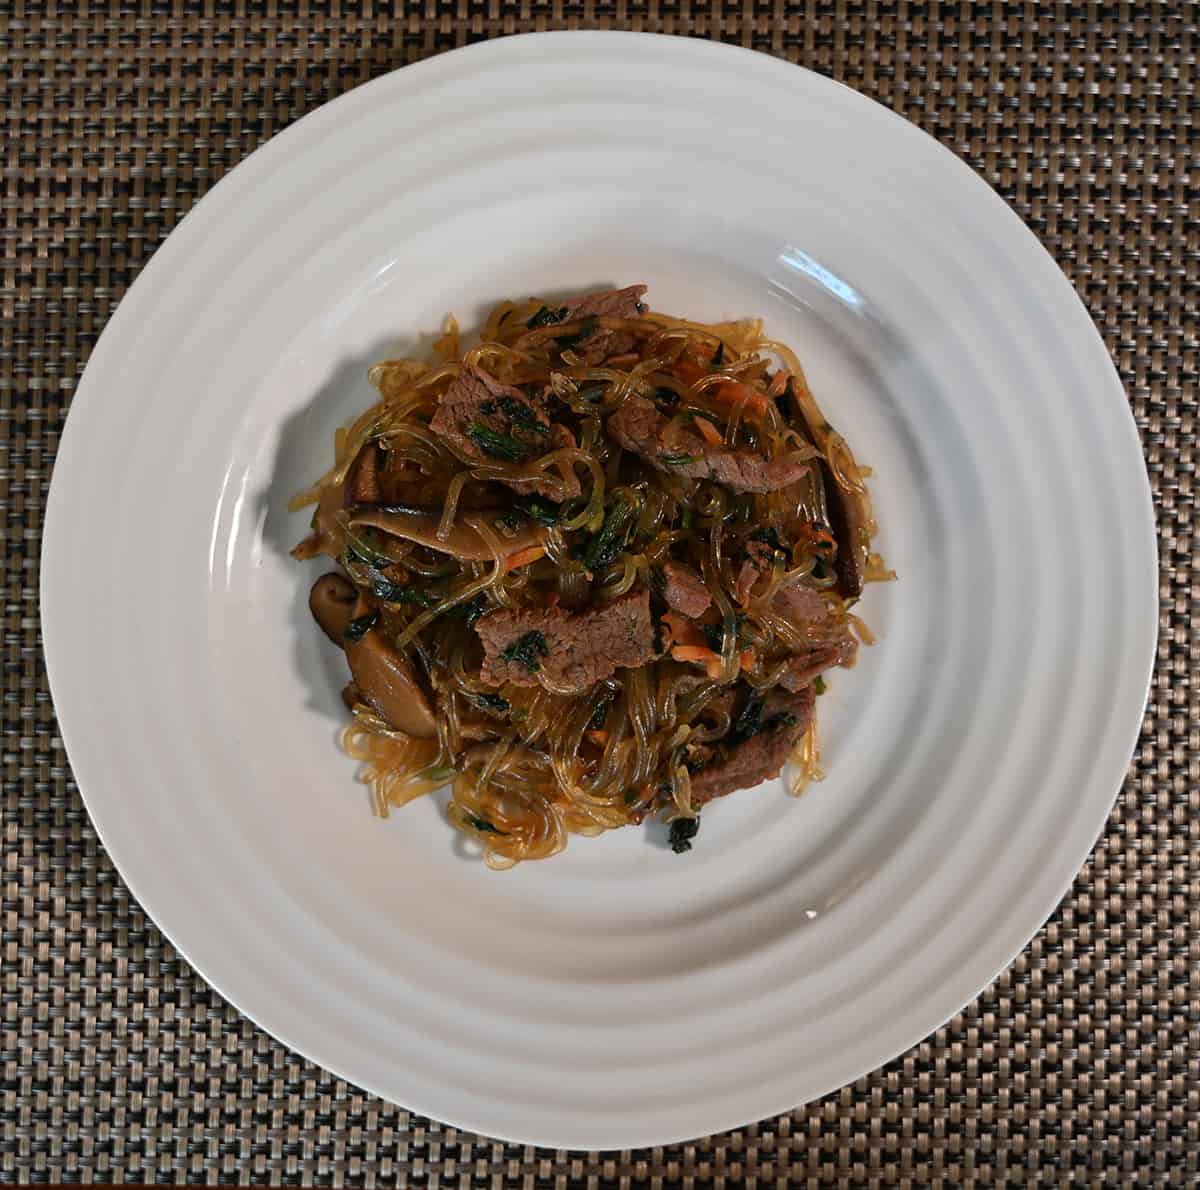 Top down image of the japchae served on a white plate.